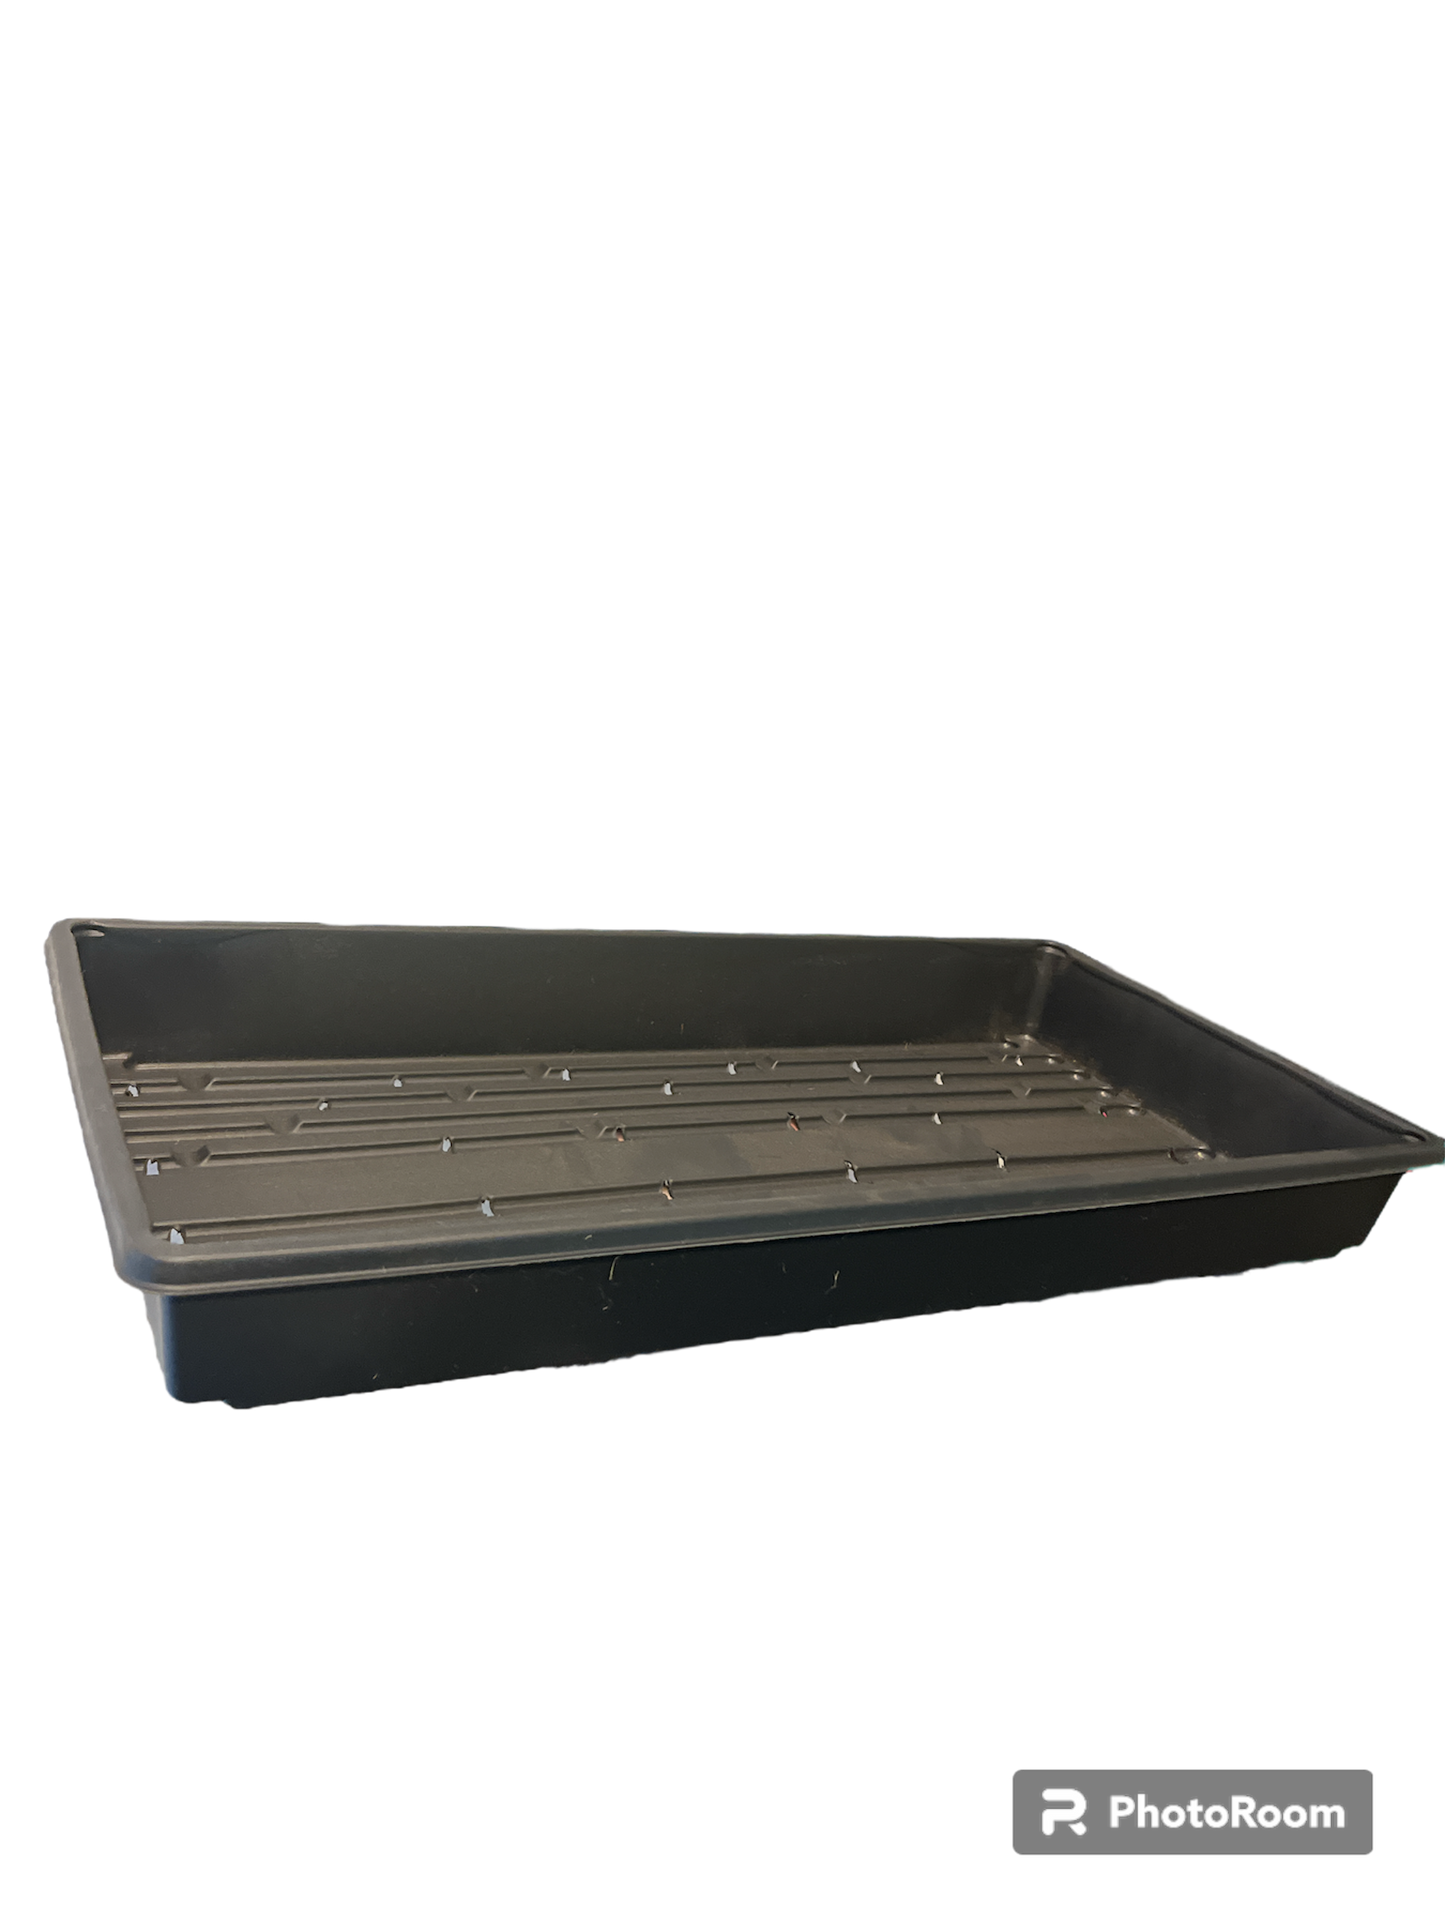 Black Plastic Tray With or Without Holes